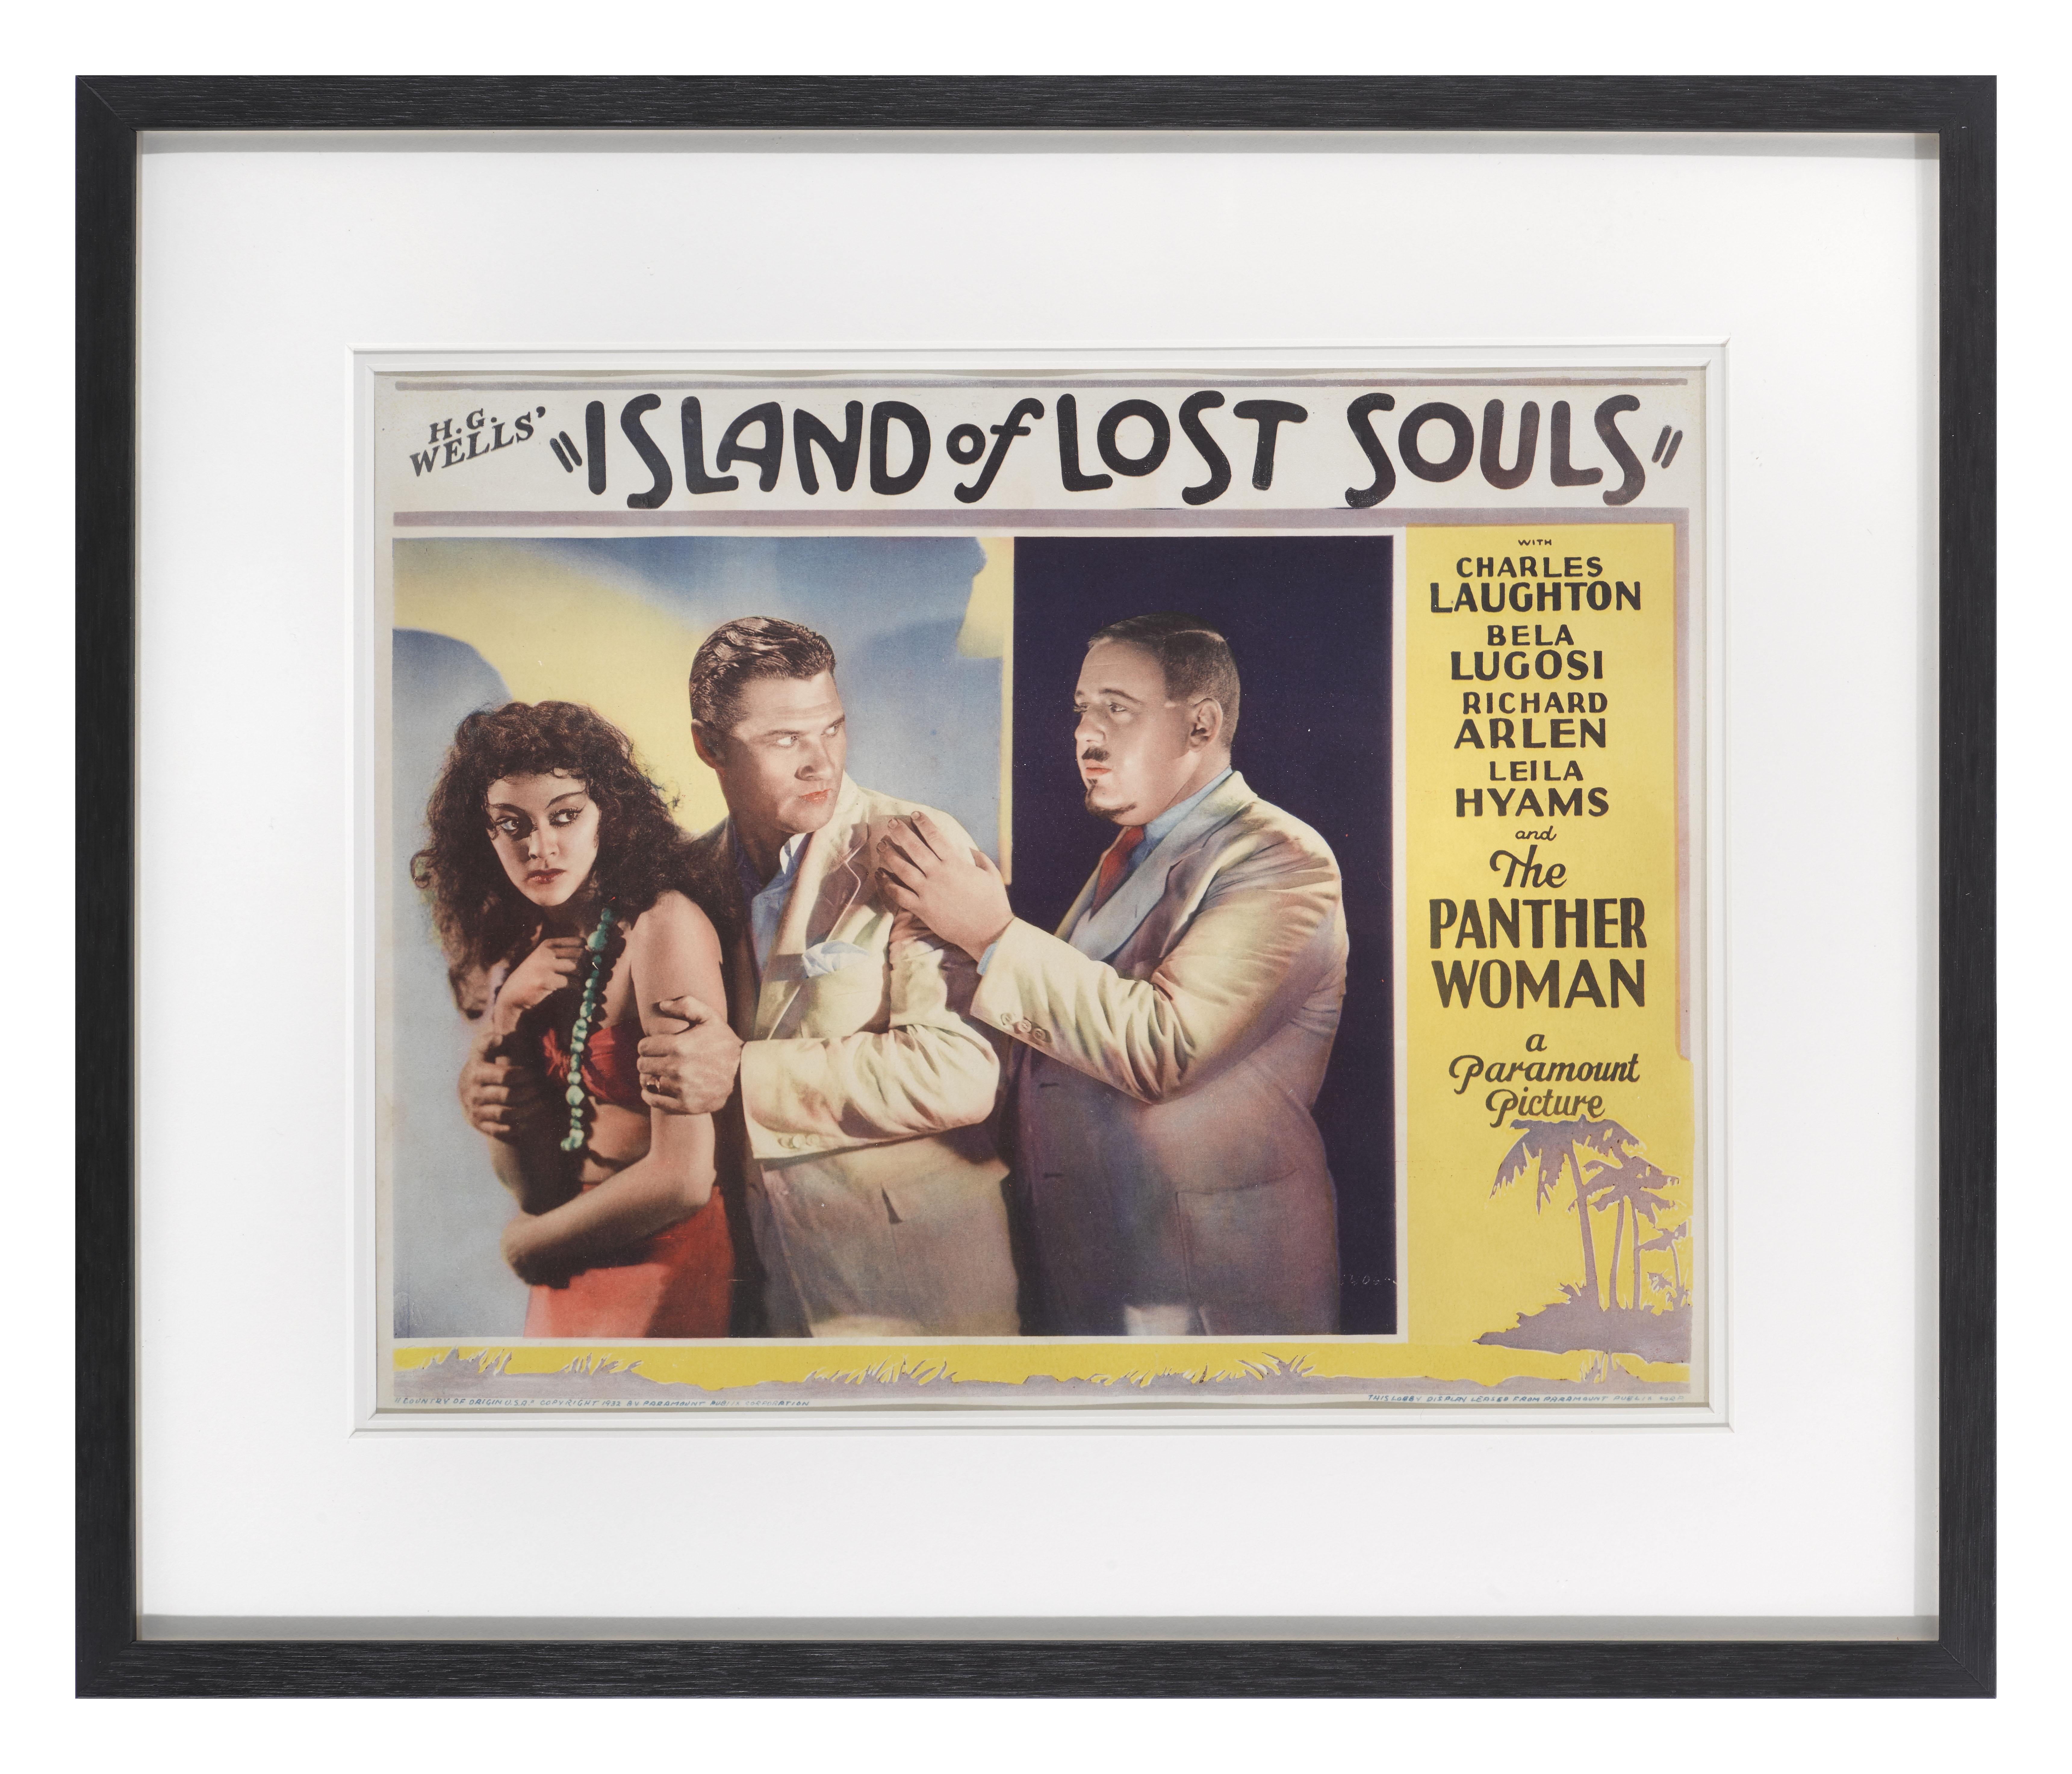 American Island of Lost Souls For Sale